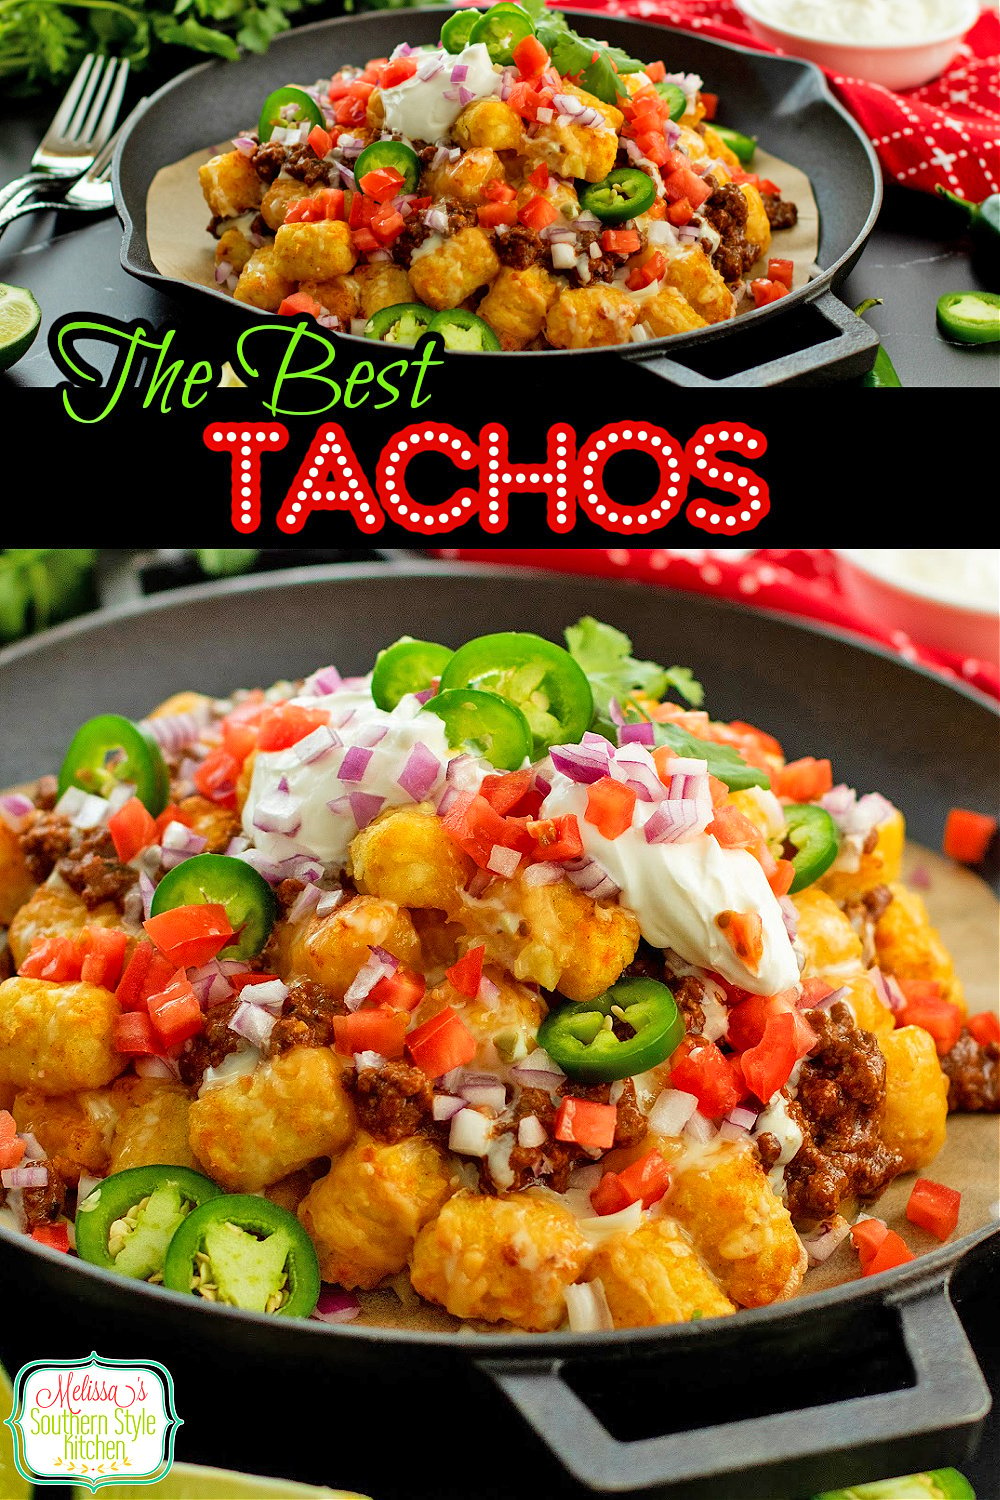 These loaded cheesy Tachos feature crispy baked tater tots loaded with the best nacho toppings #tachos #tatertots #appetizerrecipes #easytotchos #potatorecipes #tatertotrecipes #easygroundbeefrecipes